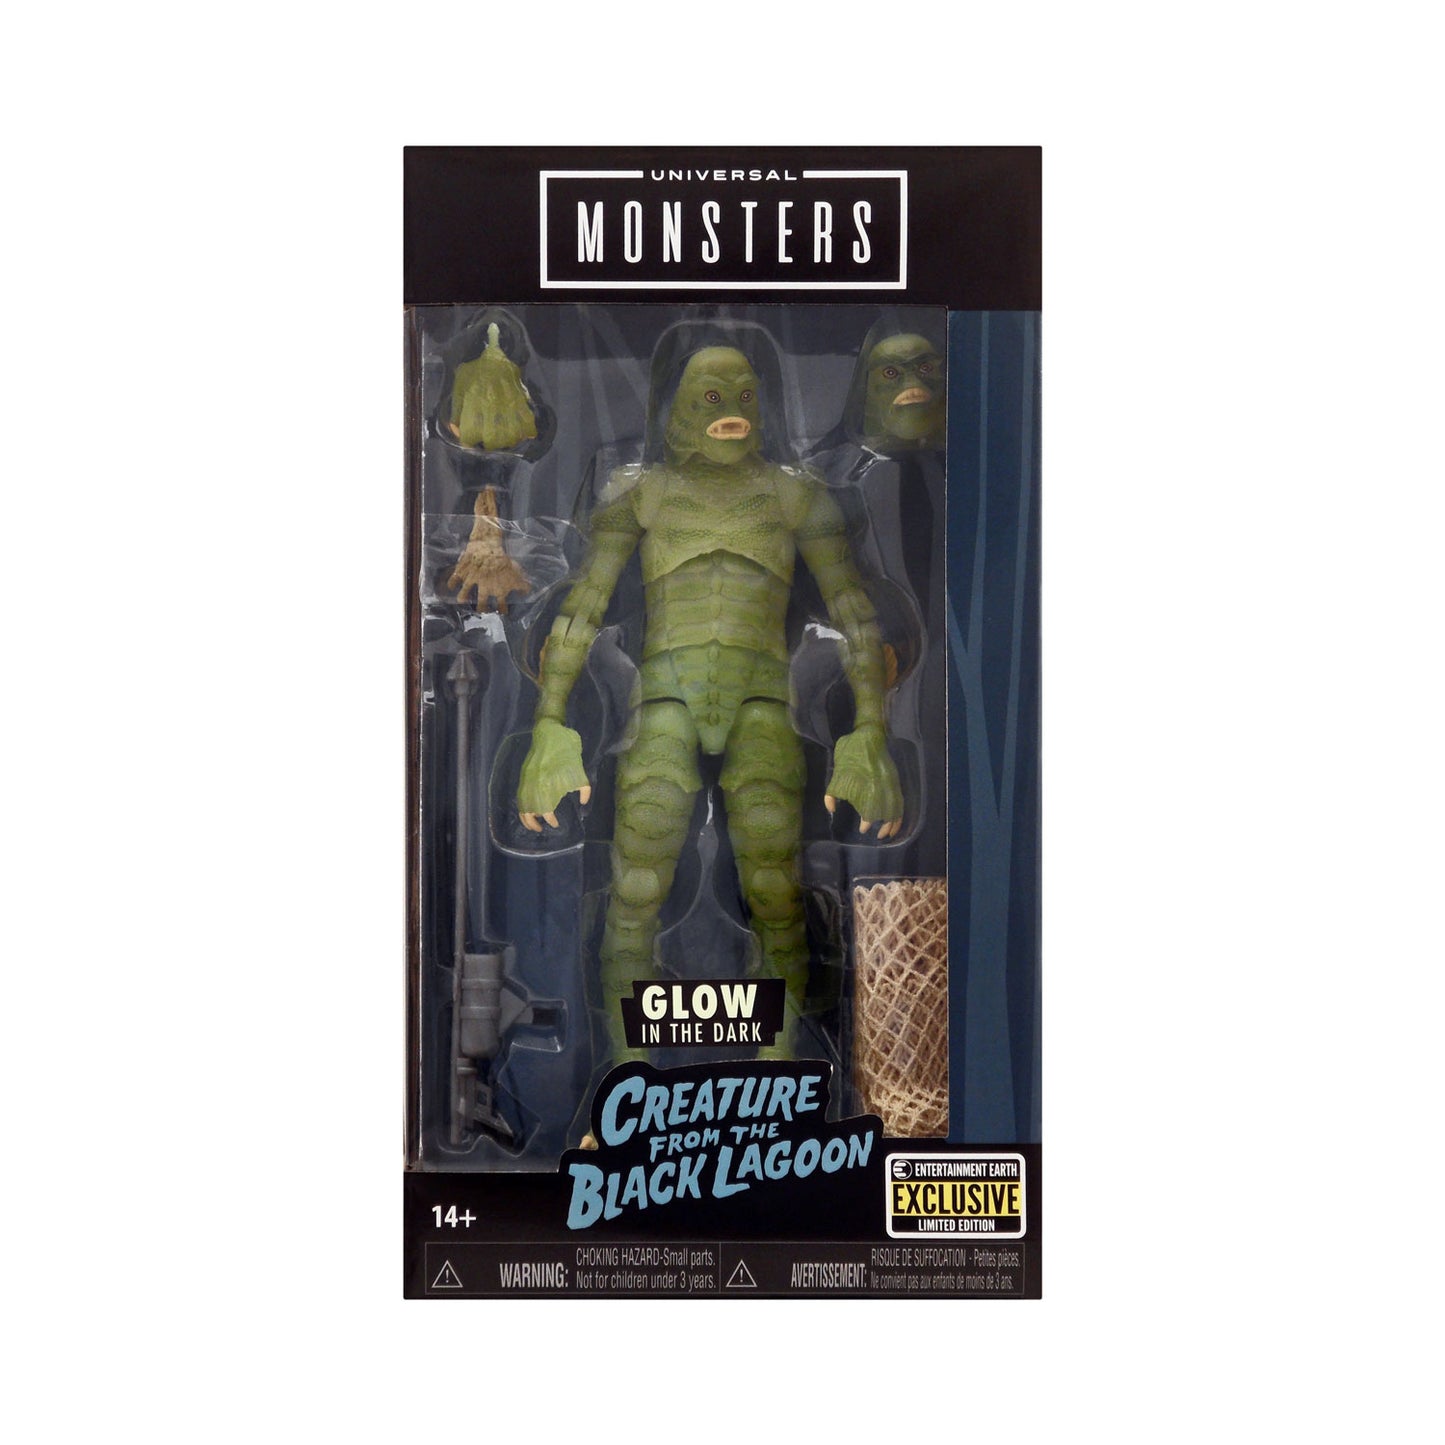 Glow in the Dark Creature from the Black Lagoon from Jada Toys Universal Monsters